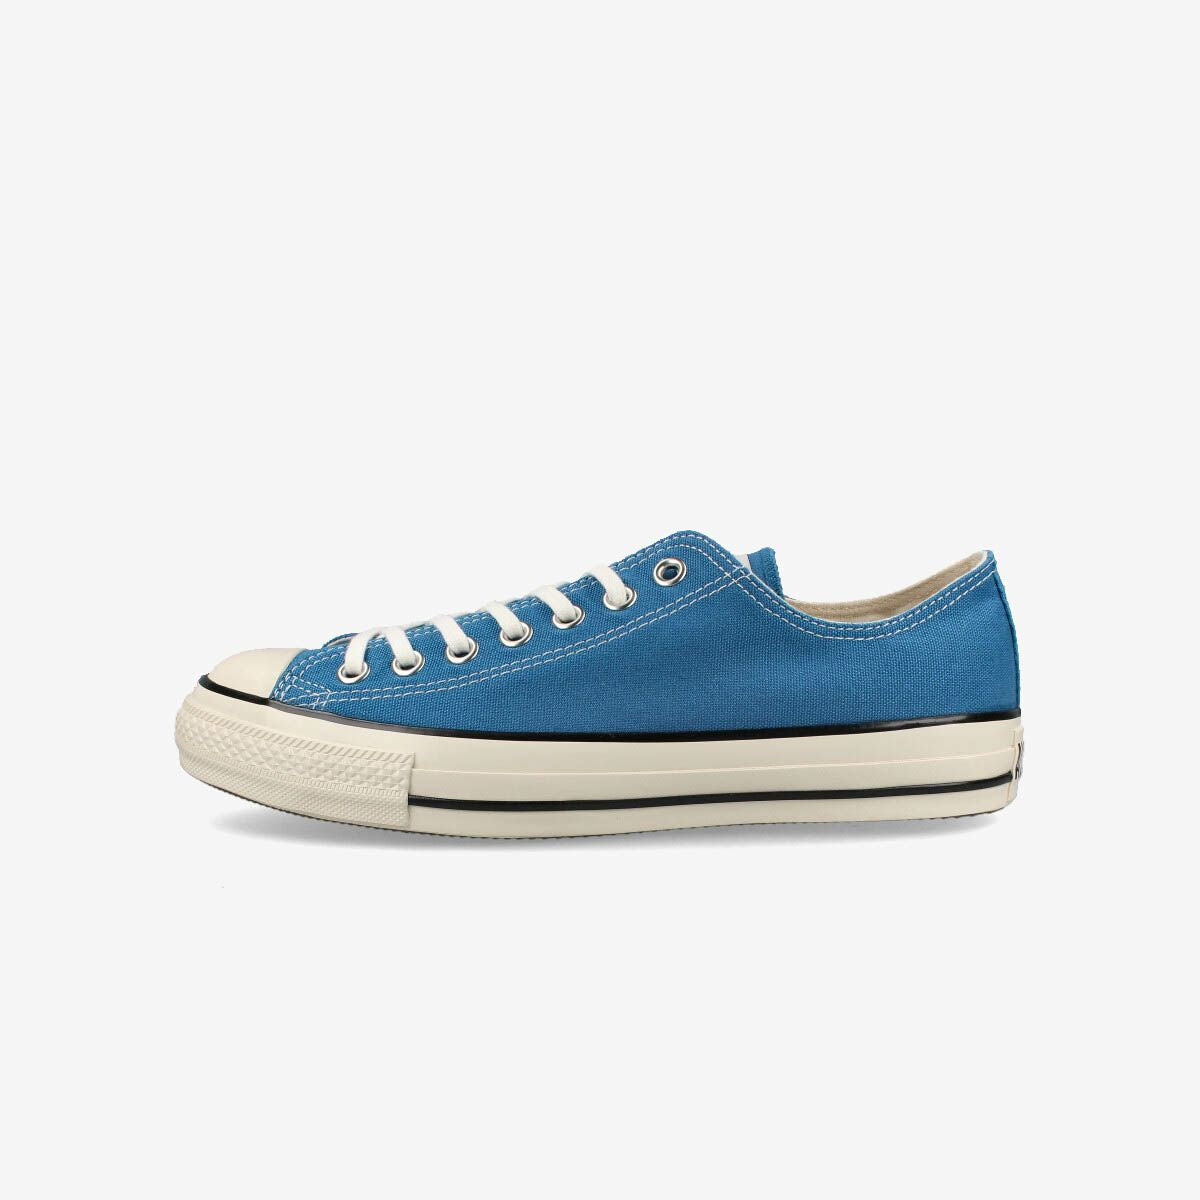 CONVERSE ALL STAR US OX CLASSIC BLUE